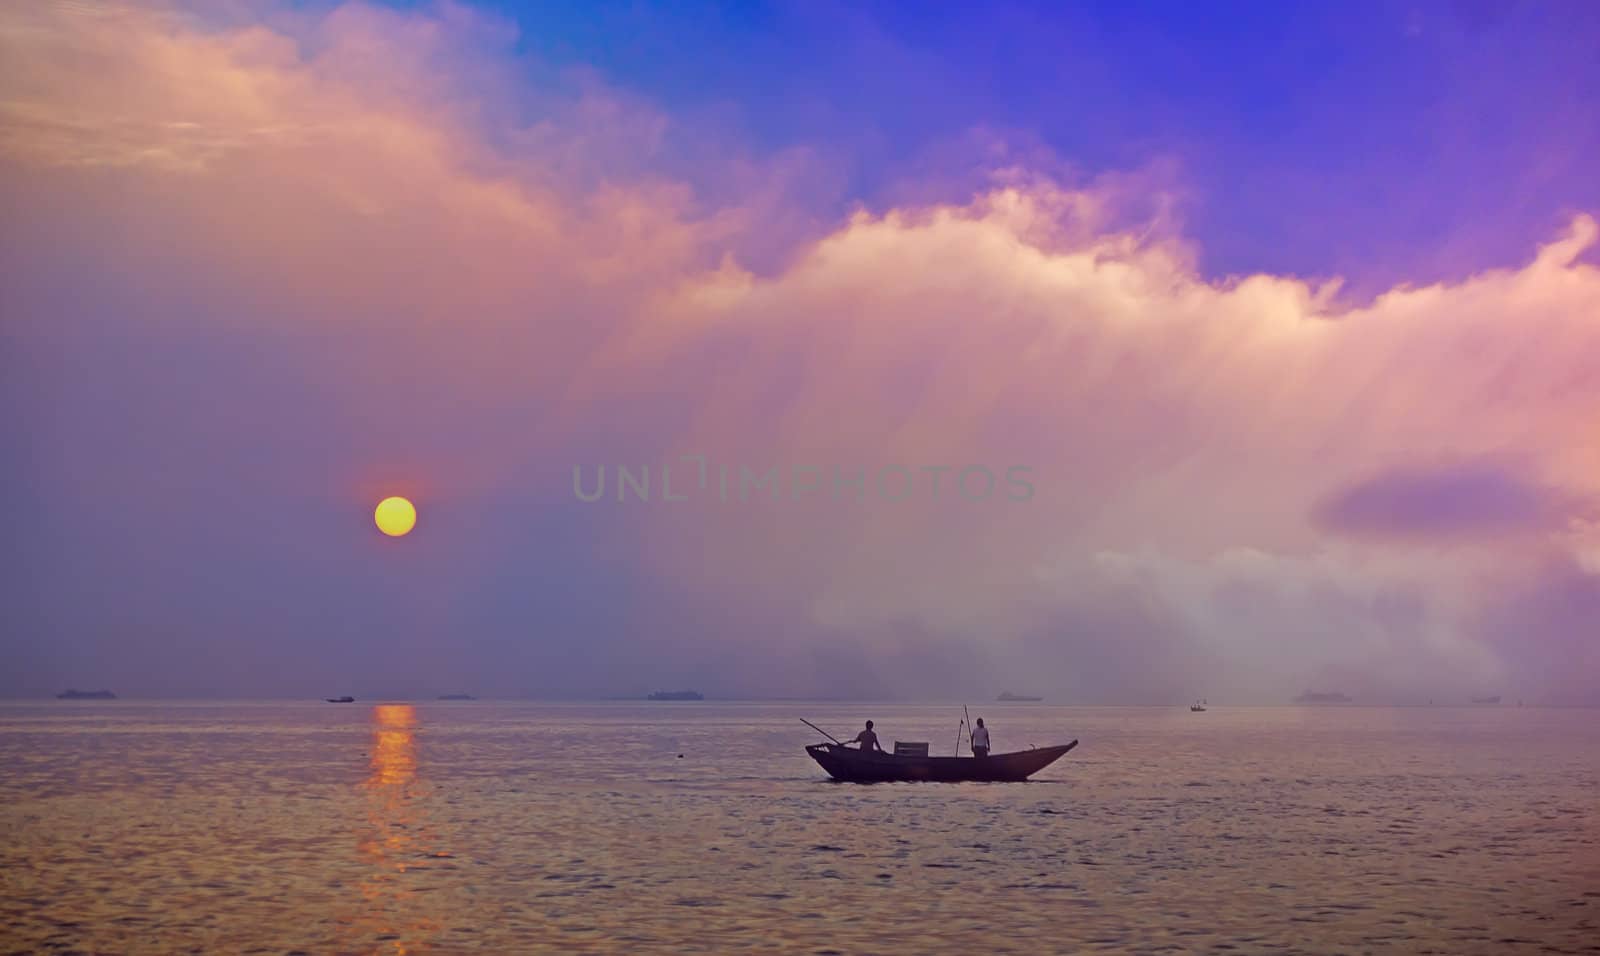 Ocean sunset background image by xfdly5